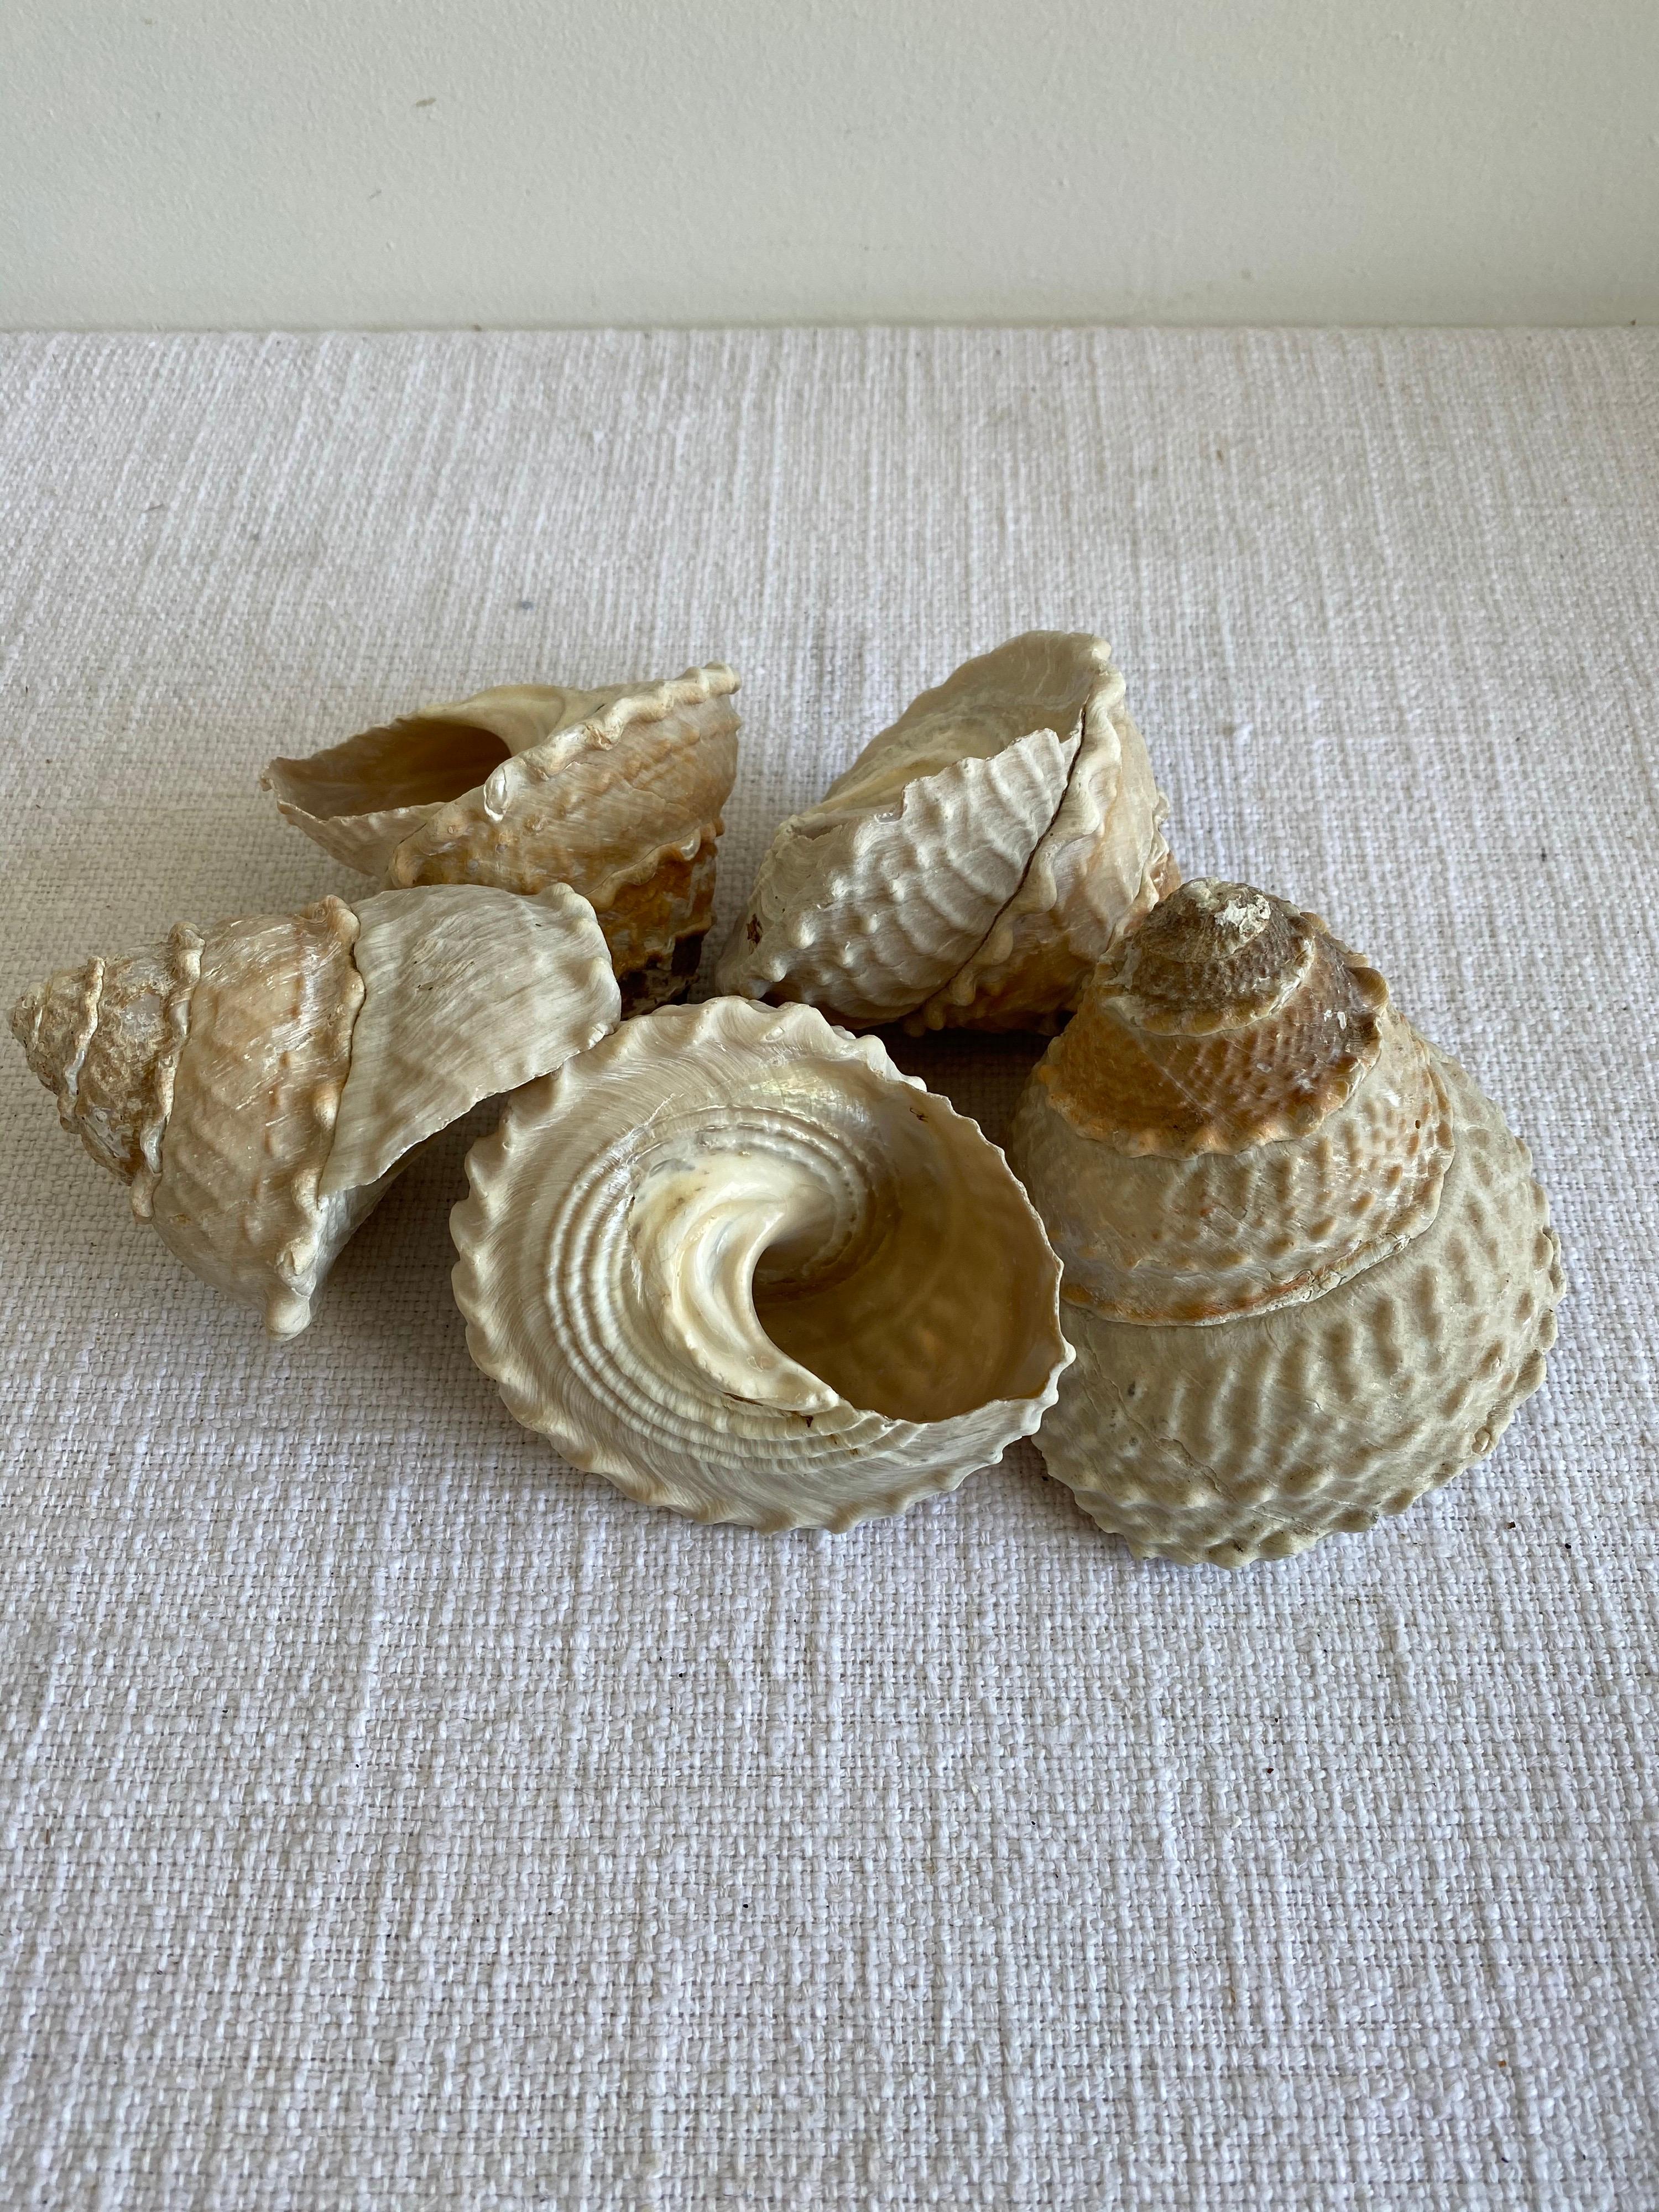 Beautiful natural real shells.
This coral is real, not faux, and color is natural, not dyed.
Size: 5